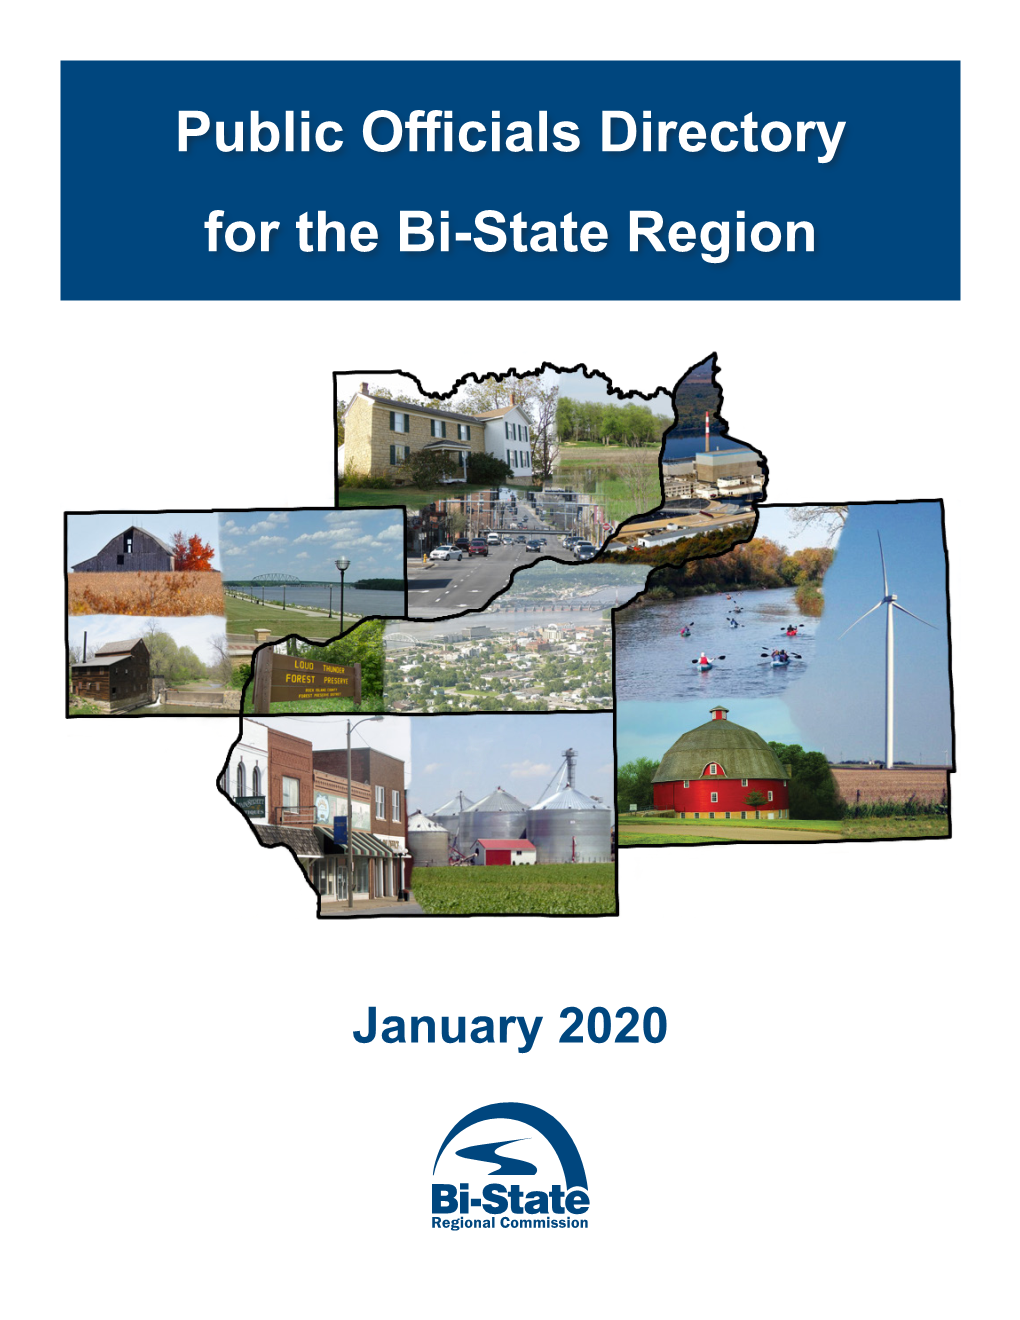 Public Officials Directory for the Bi-State Region